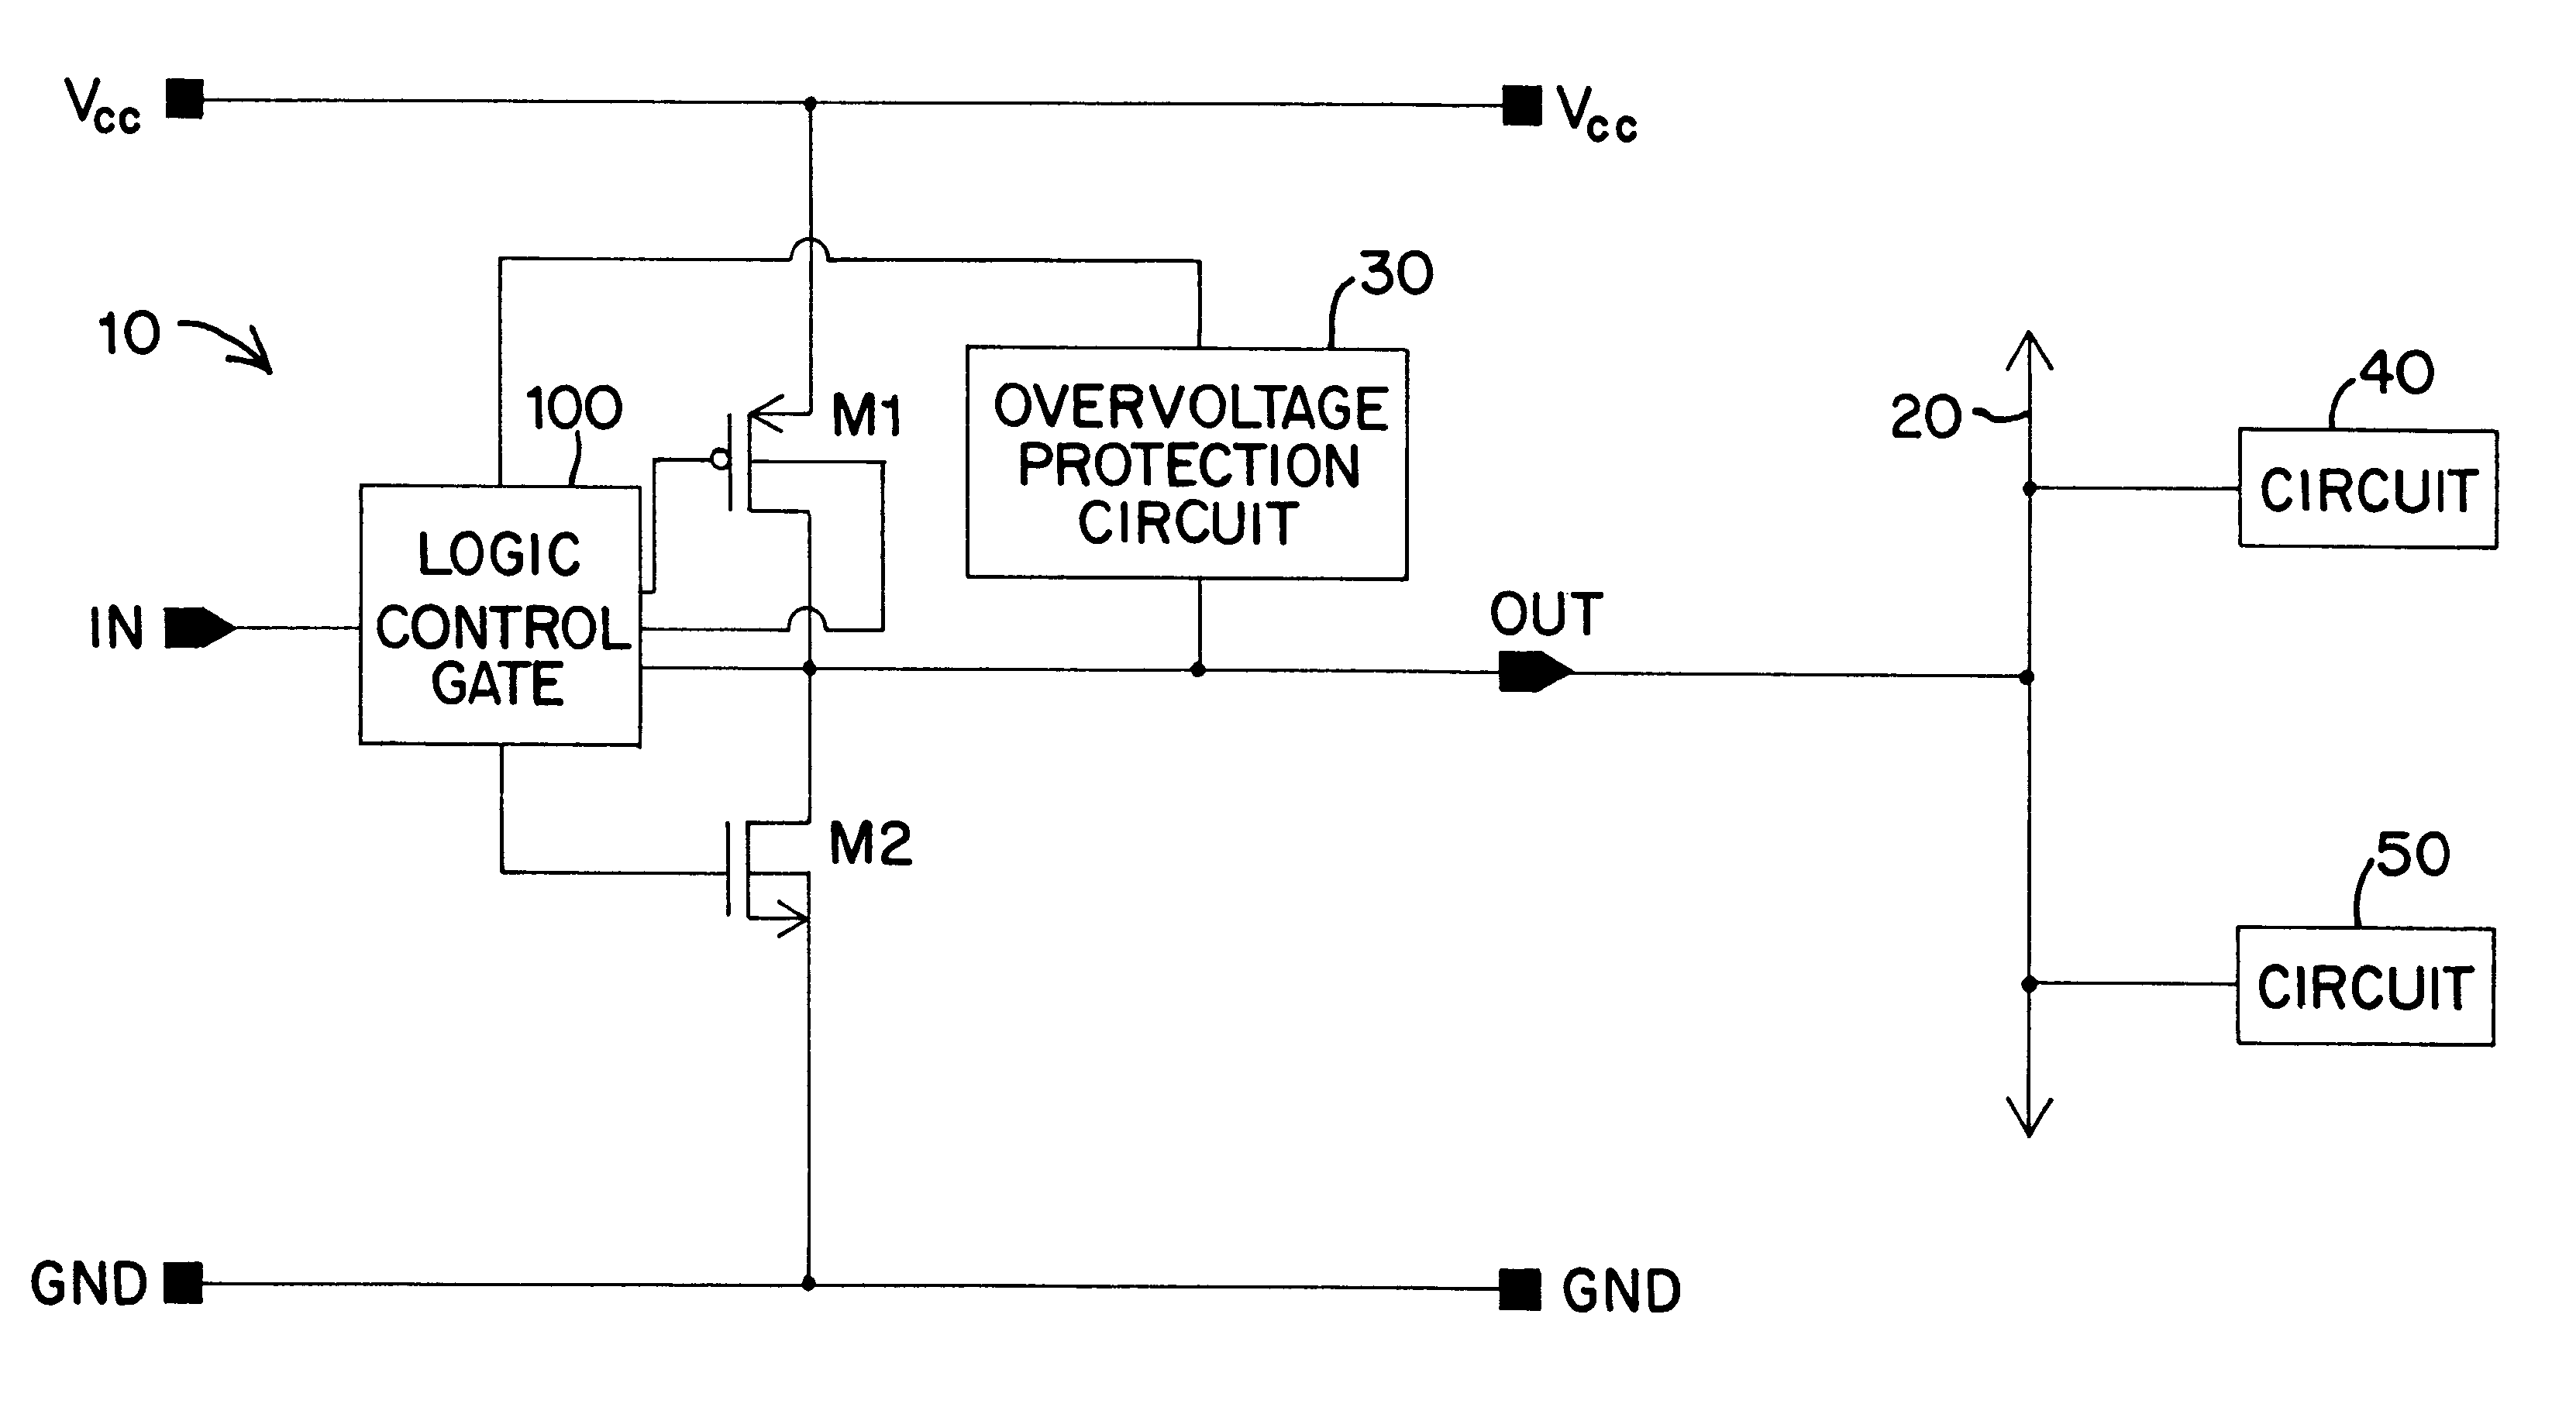 Overvoltage protection circuit with overvoltage removal sensing